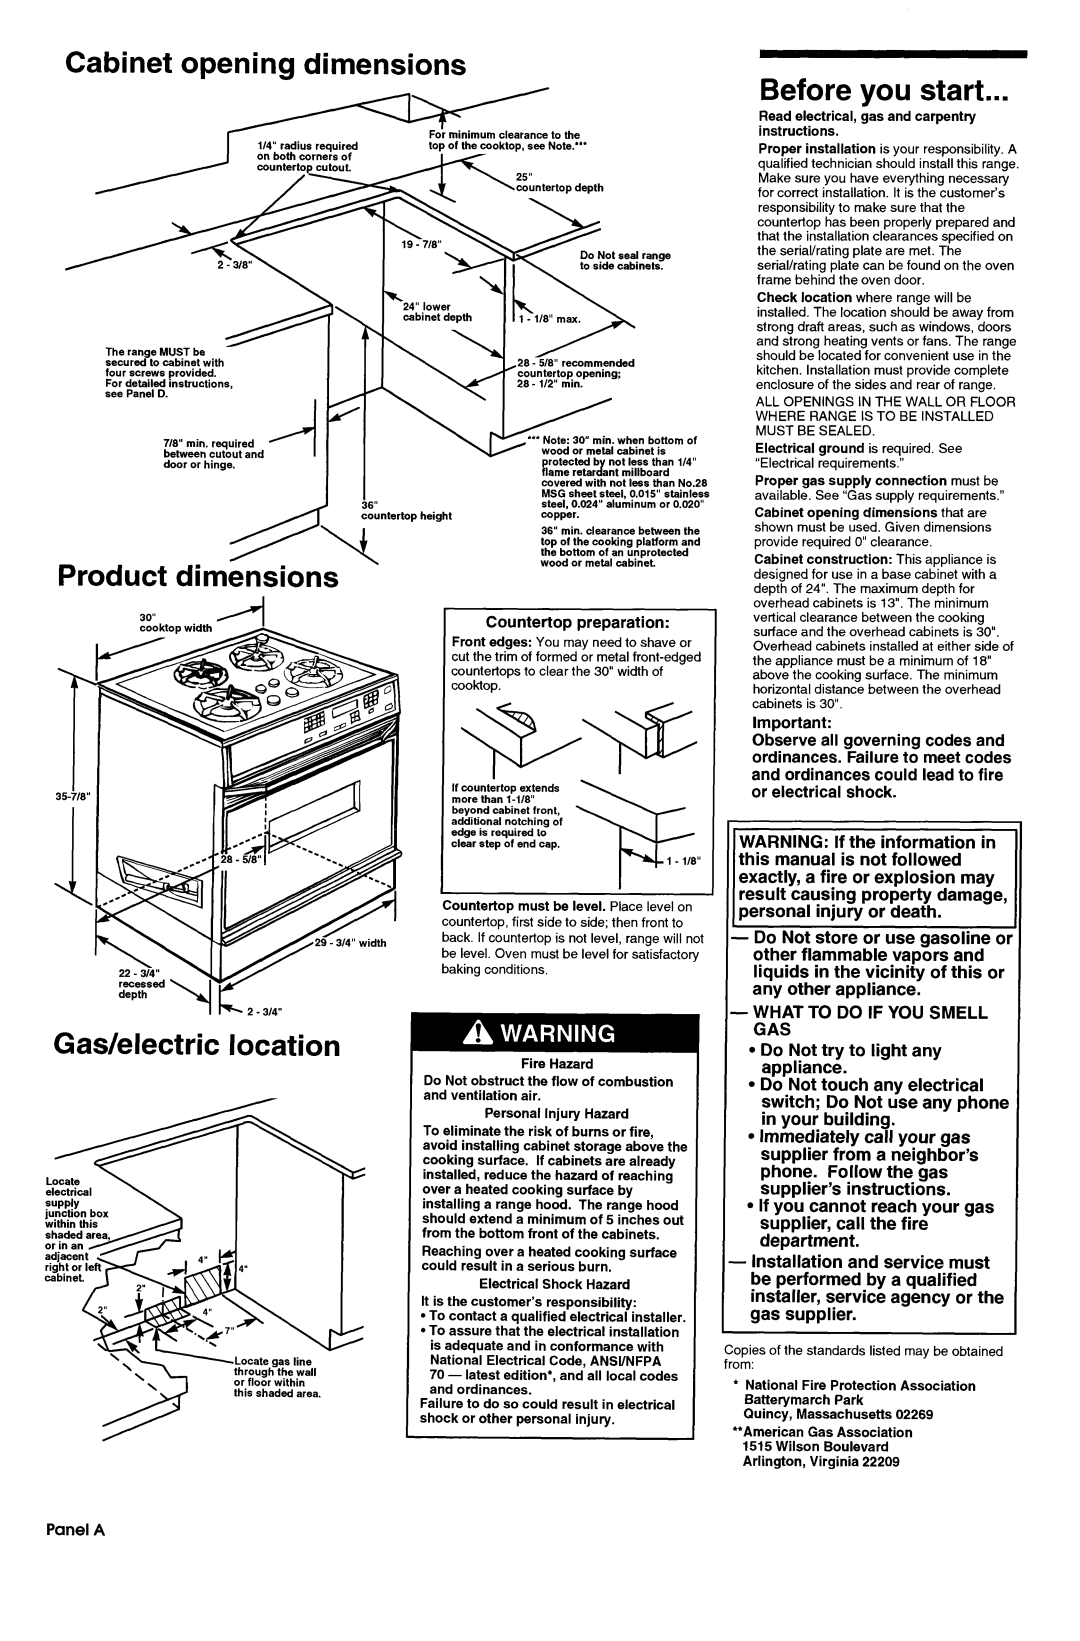 KitchenAid 3186508 Cabinet opening dimensions, Before you start, Product dimensions, Gas/electric location, Panel A 